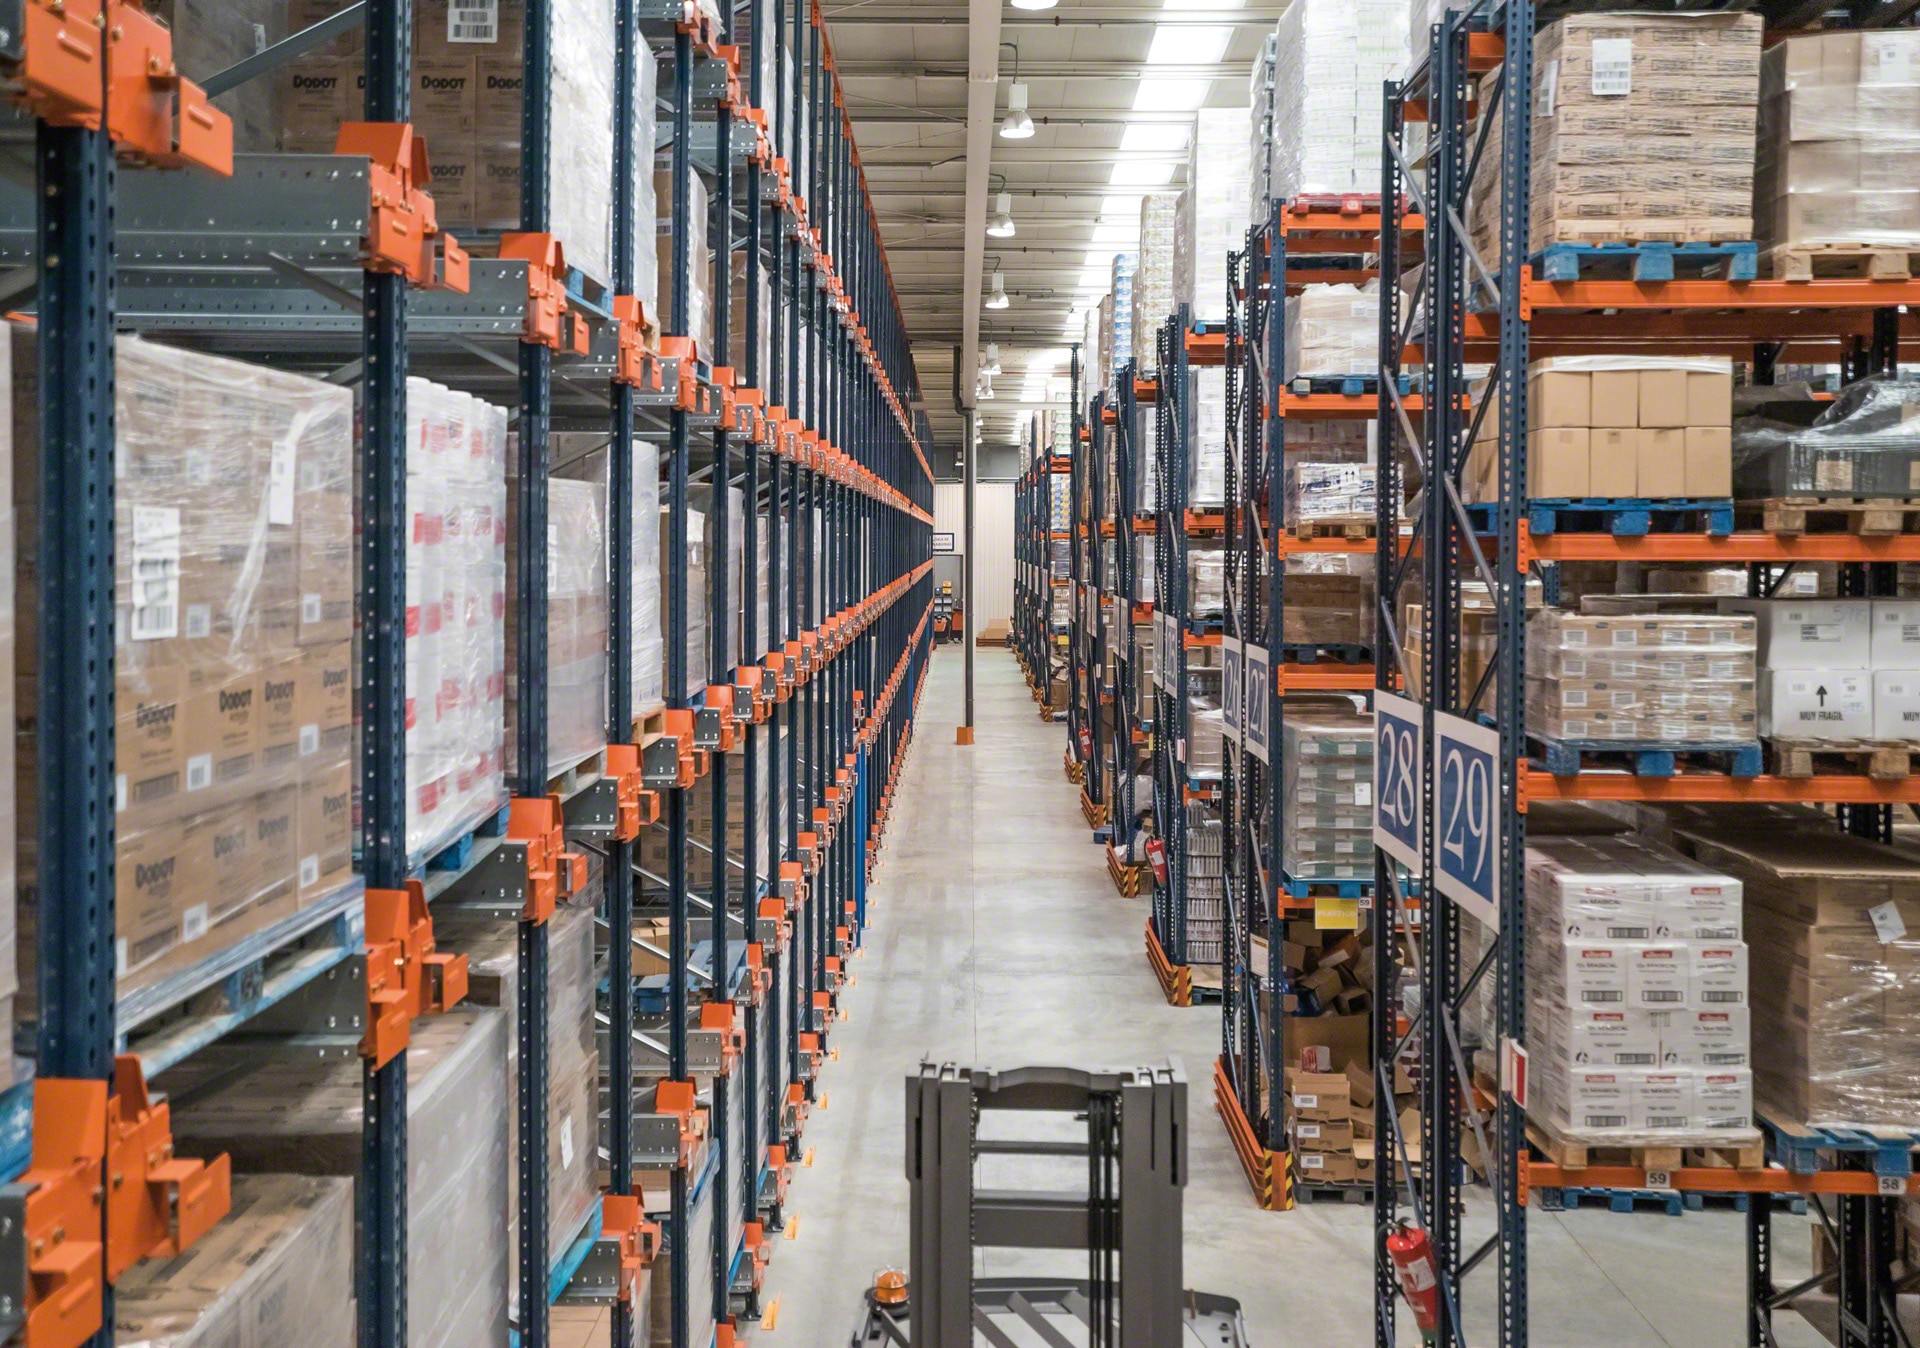 The Pallet Shuttle can be combined with standard racks in warehouses that have products with different rotations